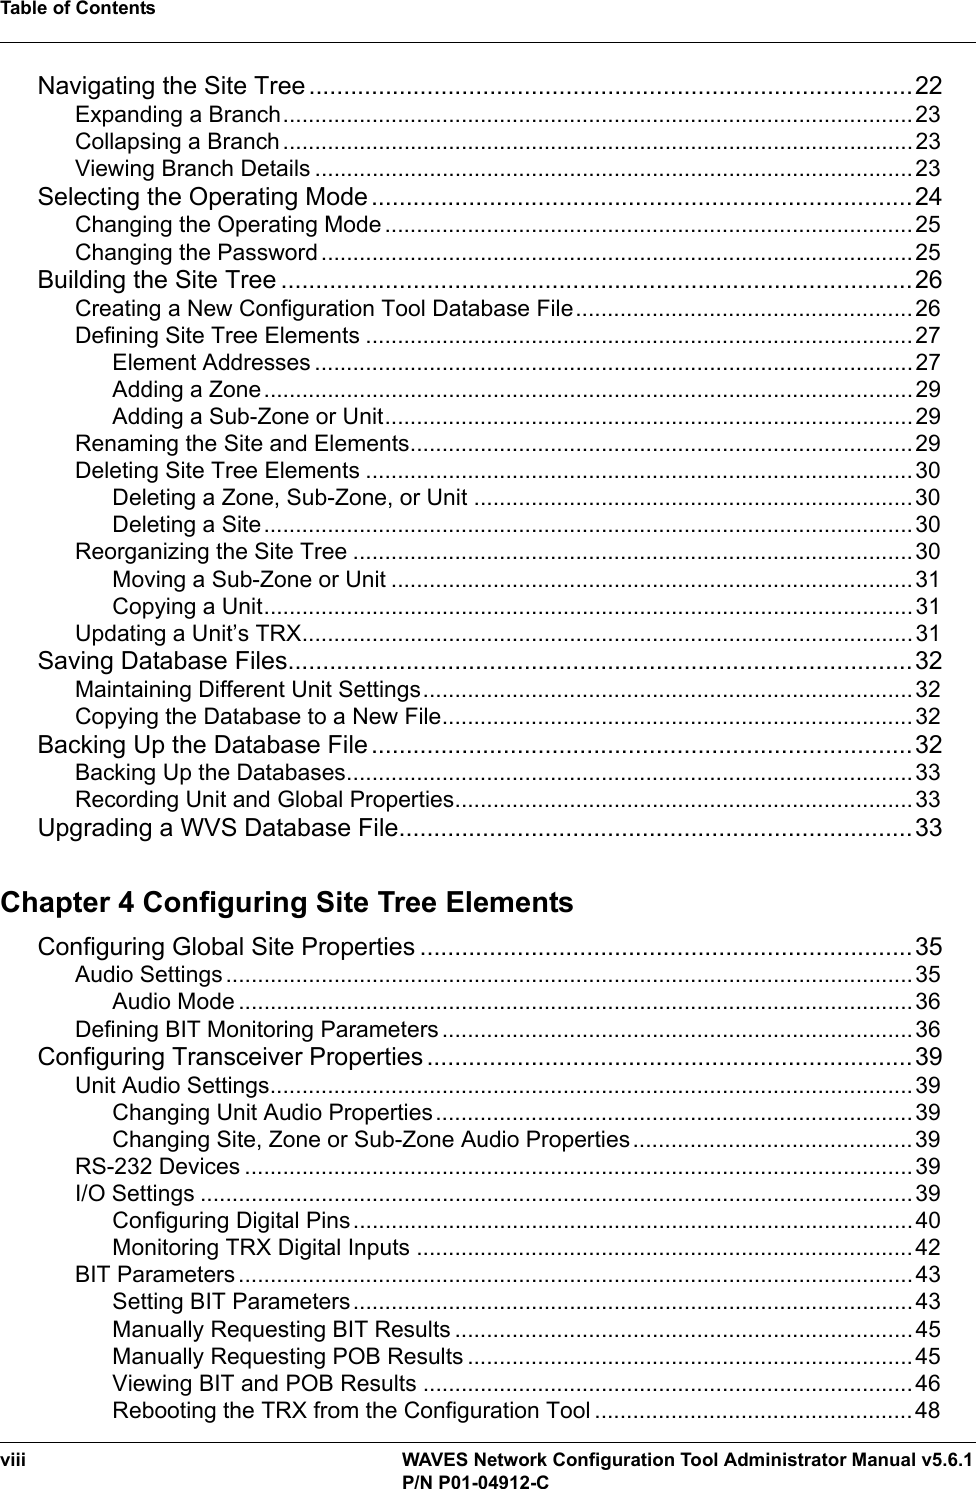 Table of Contentsviii WAVES Network Configuration Tool Administrator Manual v5.6.1P/N P01-04912-CNavigating the Site Tree .......................................................................................22Expanding a Branch...................................................................................................23Collapsing a Branch ...................................................................................................23Viewing Branch Details ..............................................................................................23Selecting the Operating Mode ..............................................................................24Changing the Operating Mode...................................................................................25Changing the Password .............................................................................................25Building the Site Tree ...........................................................................................26Creating a New Configuration Tool Database File.....................................................26Defining Site Tree Elements ......................................................................................27Element Addresses ..............................................................................................27Adding a Zone......................................................................................................29Adding a Sub-Zone or Unit...................................................................................29Renaming the Site and Elements...............................................................................29Deleting Site Tree Elements ......................................................................................30Deleting a Zone, Sub-Zone, or Unit .....................................................................30Deleting a Site......................................................................................................30Reorganizing the Site Tree ........................................................................................30Moving a Sub-Zone or Unit ..................................................................................31Copying a Unit......................................................................................................31Updating a Unit’s TRX................................................................................................31Saving Database Files..........................................................................................32Maintaining Different Unit Settings.............................................................................32Copying the Database to a New File..........................................................................32Backing Up the Database File ..............................................................................32Backing Up the Databases.........................................................................................33Recording Unit and Global Properties........................................................................33Upgrading a WVS Database File..........................................................................33Chapter 4 Configuring Site Tree ElementsConfiguring Global Site Properties .......................................................................35Audio Settings ............................................................................................................35Audio Mode ..........................................................................................................36Defining BIT Monitoring Parameters..........................................................................36Configuring Transceiver Properties ......................................................................39Unit Audio Settings.....................................................................................................39Changing Unit Audio Properties...........................................................................39Changing Site, Zone or Sub-Zone Audio Properties............................................39RS-232 Devices .........................................................................................................39I/O Settings ................................................................................................................39Configuring Digital Pins........................................................................................ 40Monitoring TRX Digital Inputs ..............................................................................42BIT Parameters.......................................................................................................... 43Setting BIT Parameters........................................................................................43Manually Requesting BIT Results ........................................................................45Manually Requesting POB Results ......................................................................45Viewing BIT and POB Results .............................................................................46Rebooting the TRX from the Configuration Tool ..................................................48